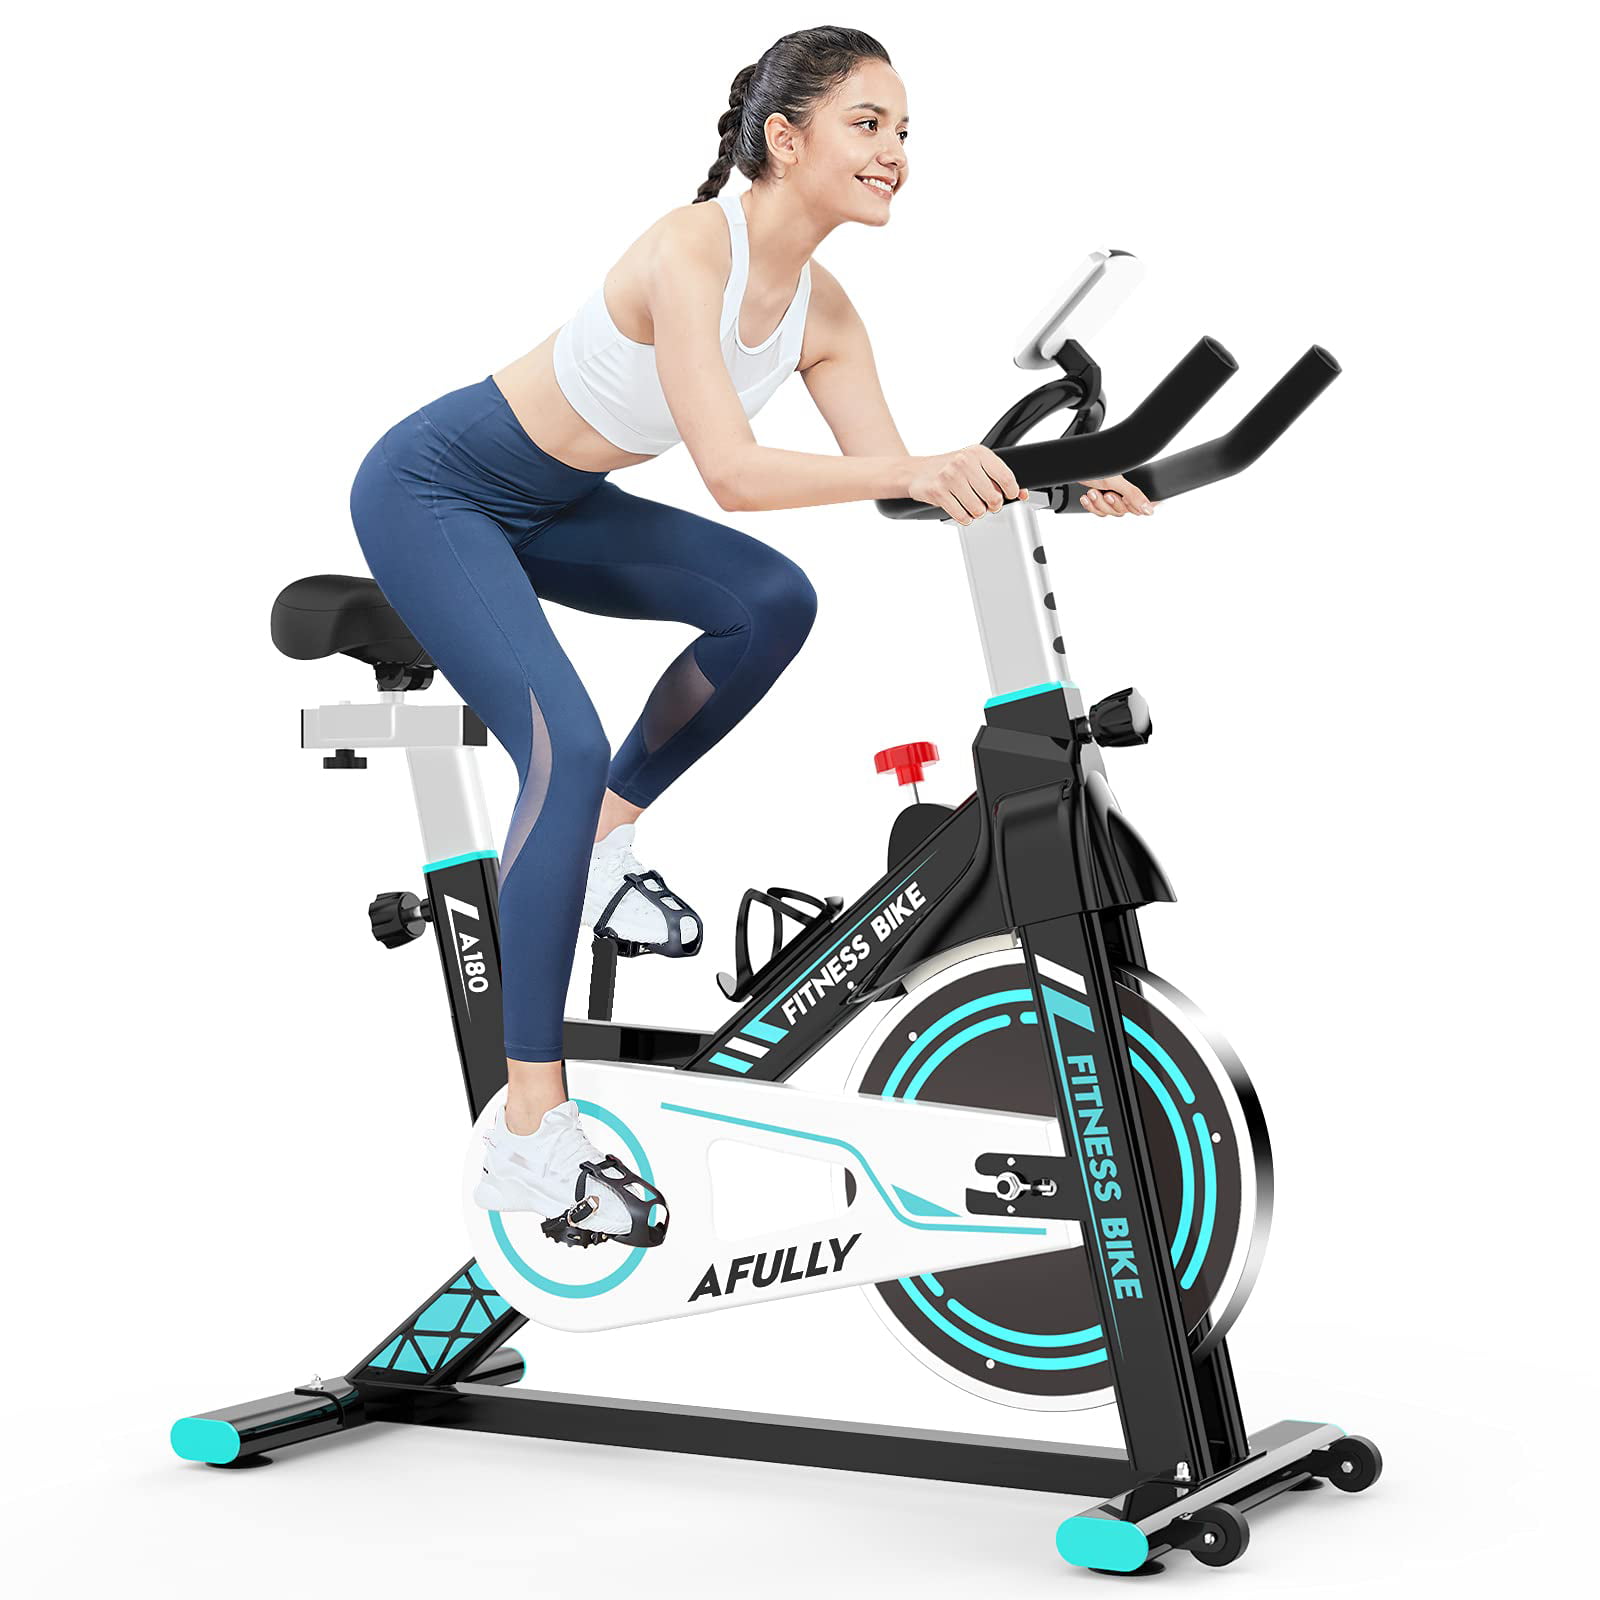 Stationary Bike LCD Displa Details about   pooboo Exercise Bike Belt Drive Indoor Cycling Bike 